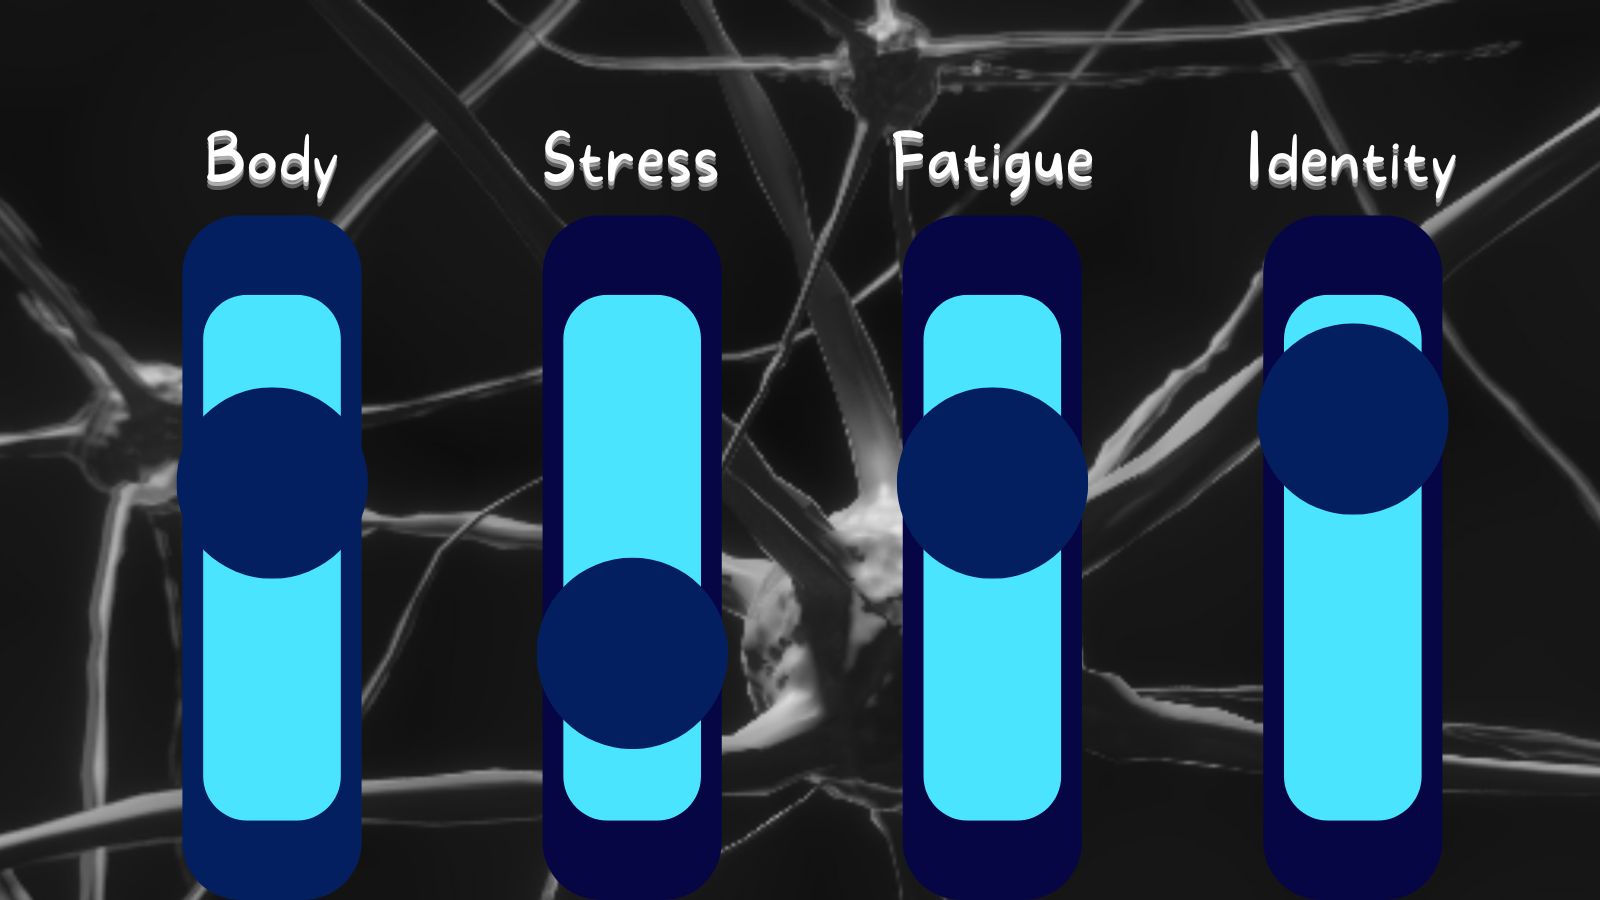 4 mental health approaches to adjust better in life: Body, stress, fatigue, identity. Image depicts 4 levels/settings to adjust as parameters for the brain.